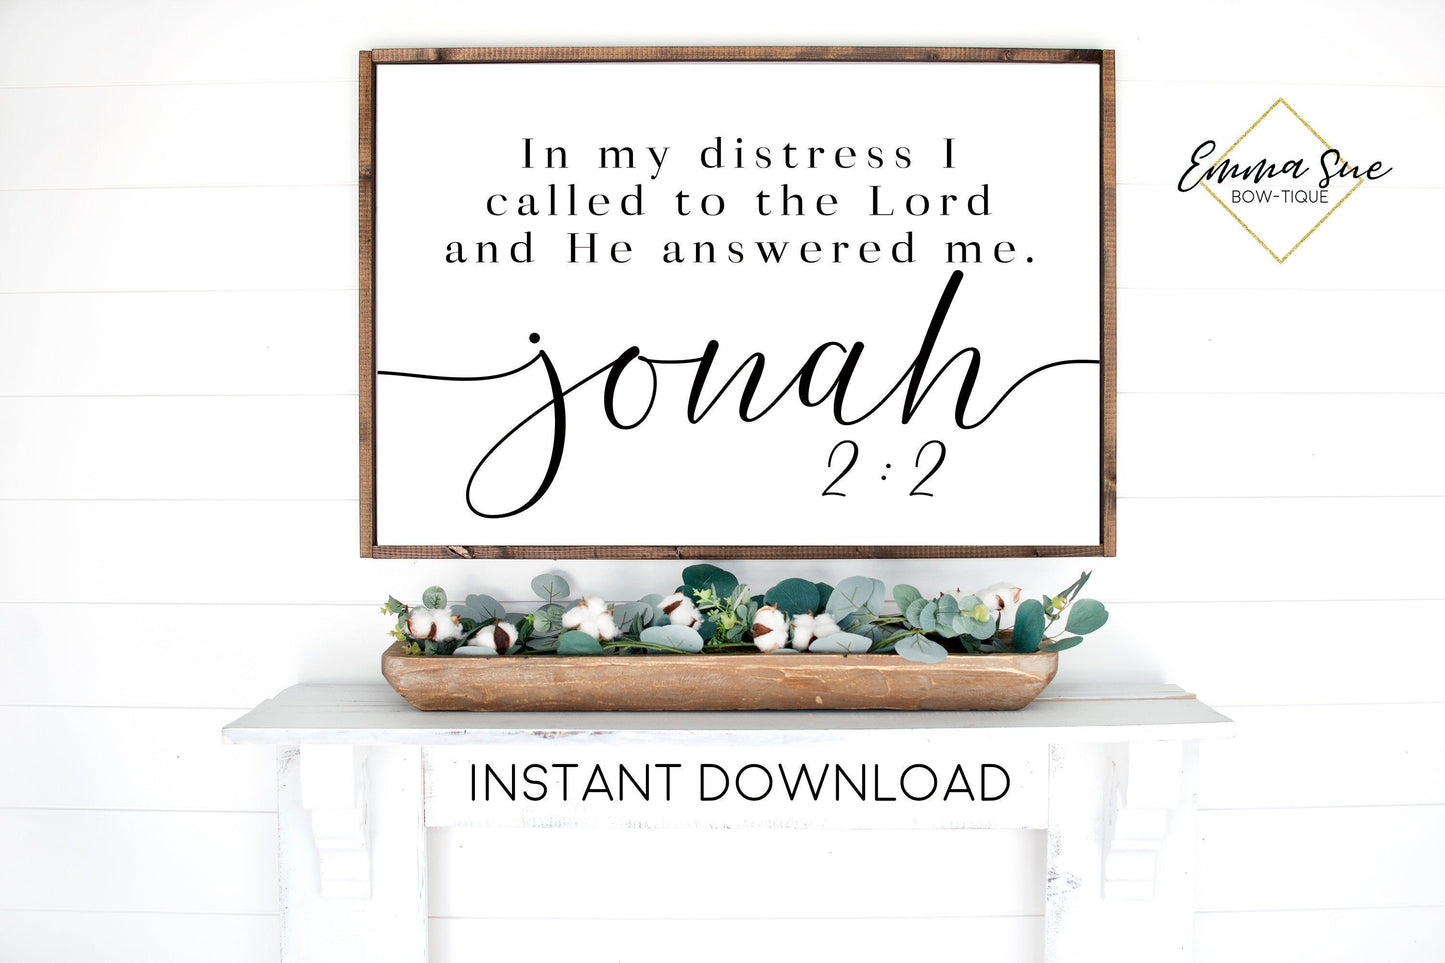 In my distress I called to the Lord Jonah 2:2 Bible Verse Farmhouse Printable Sign Wall Art